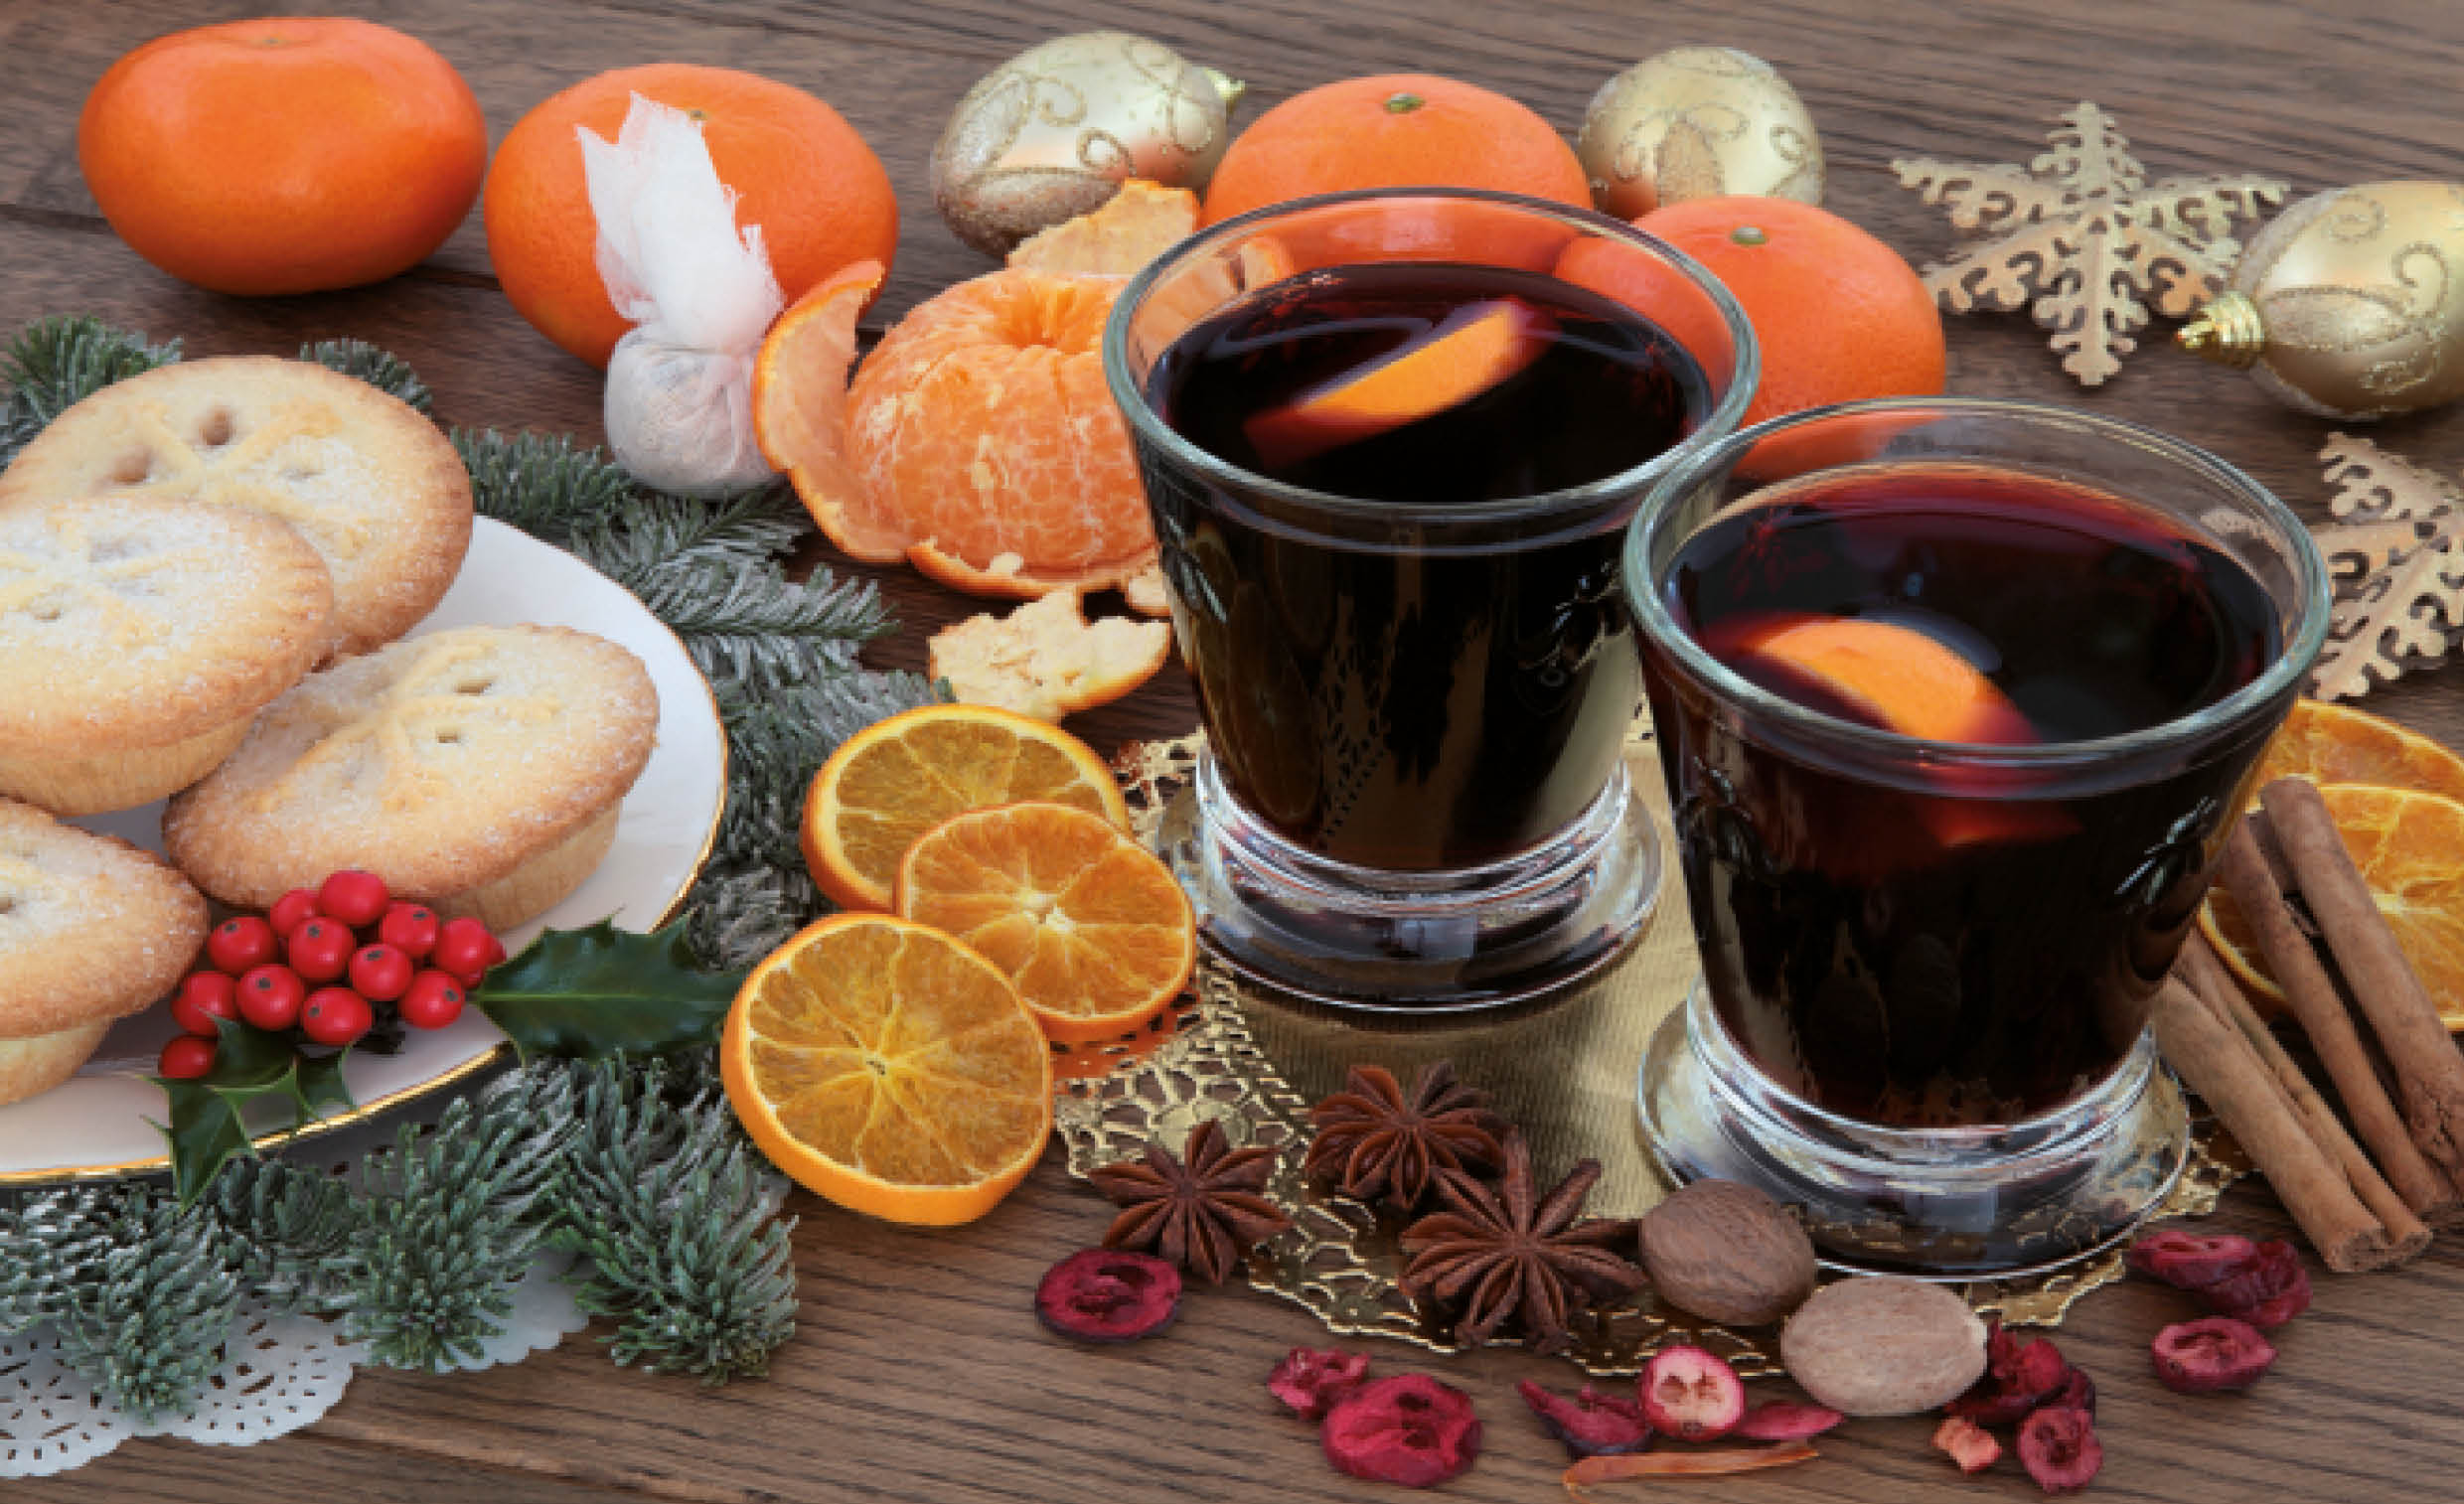 Mulled wine and Mince pies